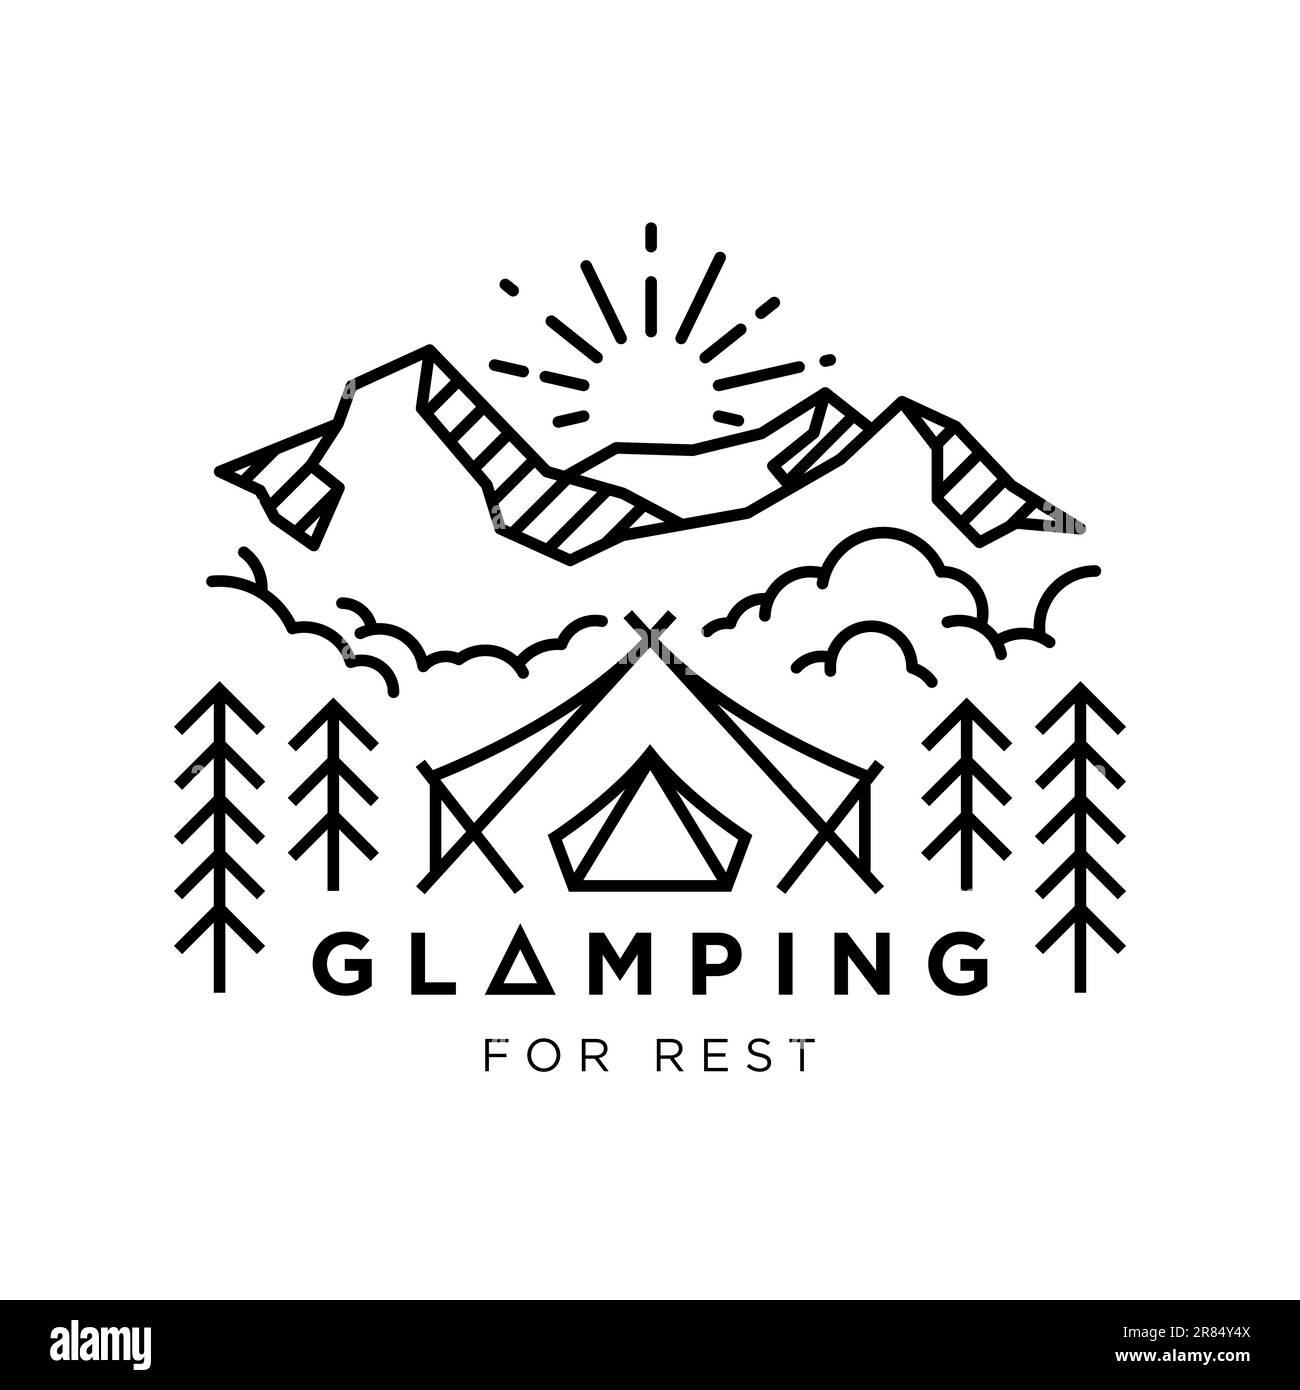 glamorous camping vintage monoline vector illustration concept for travel,tourism,logo,glamping vacation Stock Vector